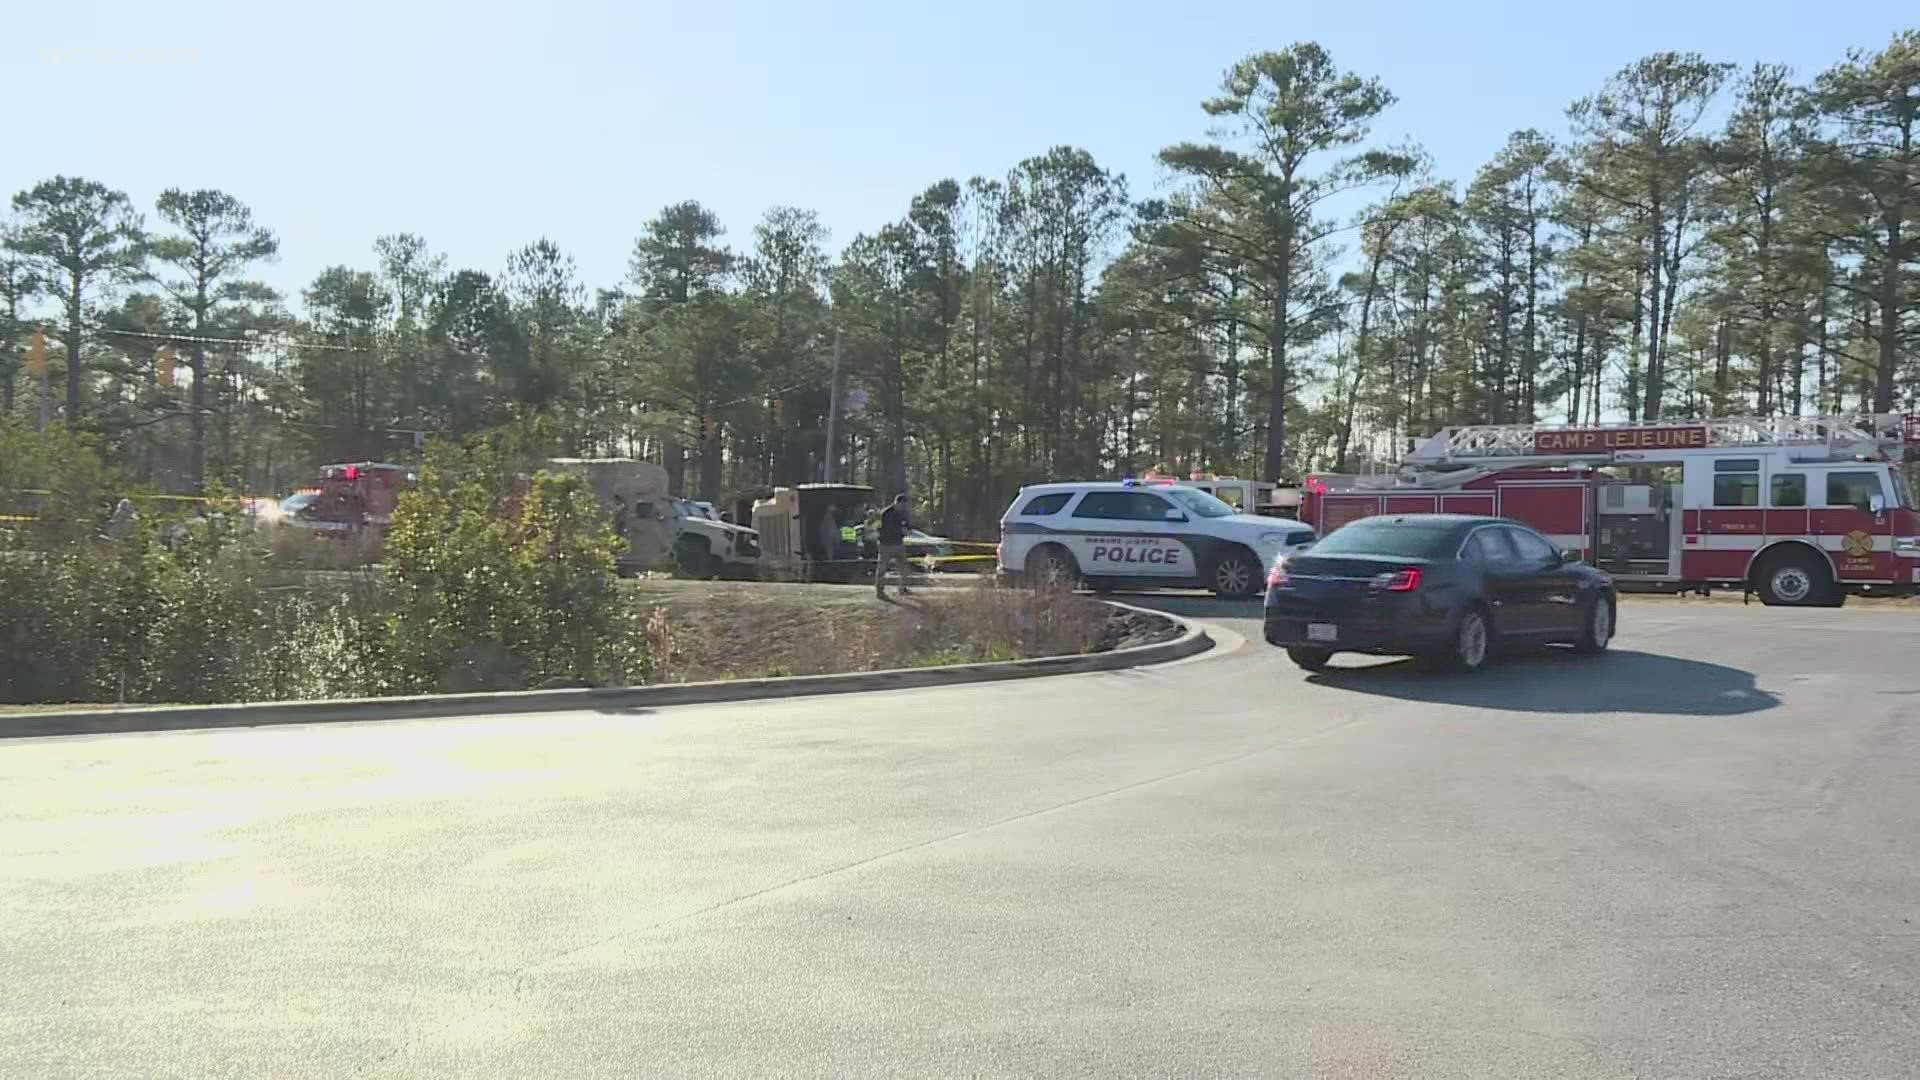 Marines based out of Camp Lejeune in Jacksonville, North Carolina have been injured after their military vehicle overturned Wednesday, according to a local report.